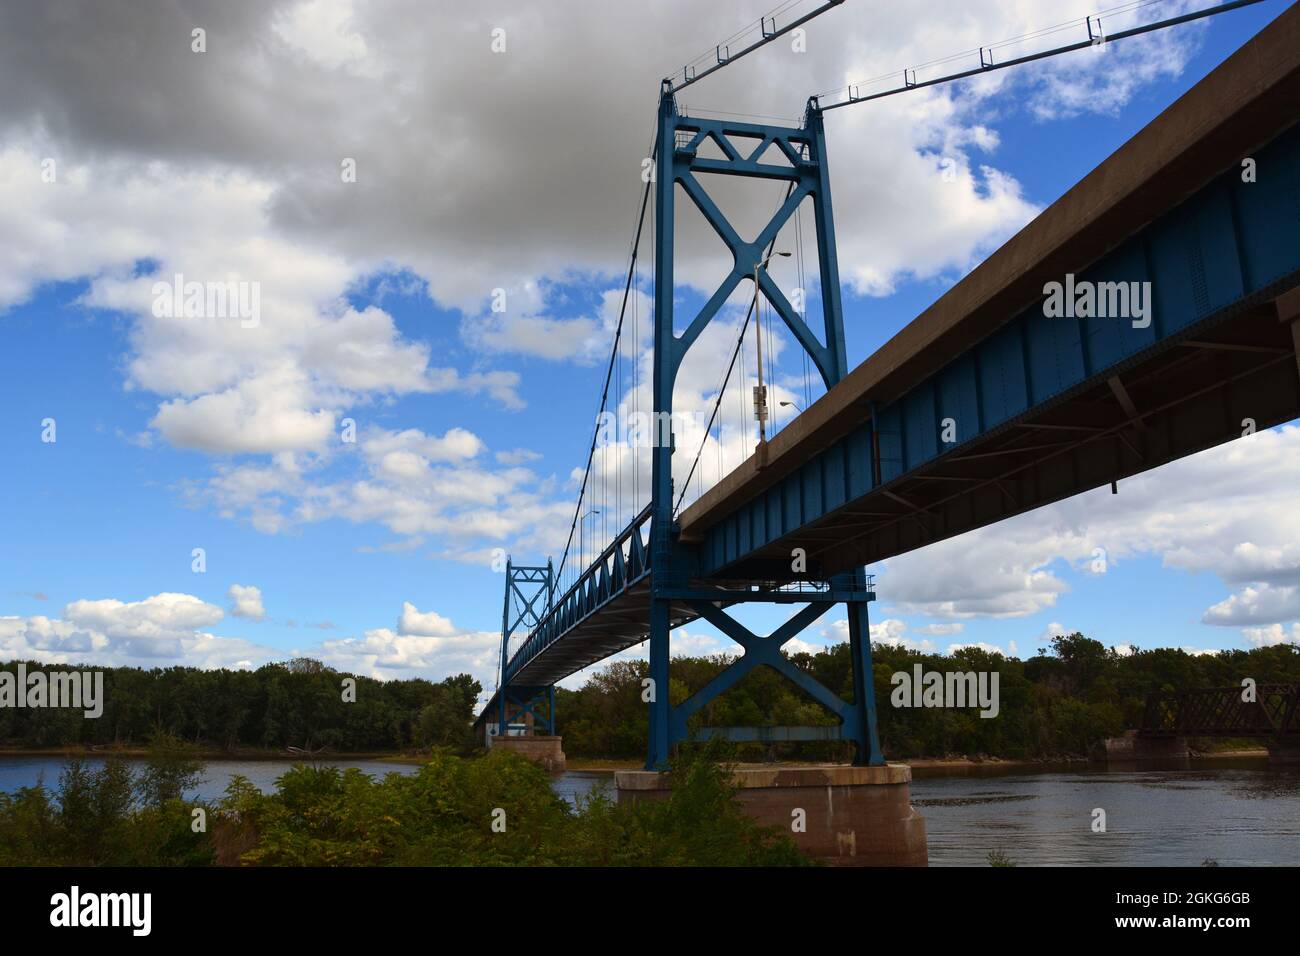 The US Route 30 Gateway Bridge over the Mississippi River opened in 1956 carries traffic between Clinton, Iowa and Fulton, Illinois. Stock Photo